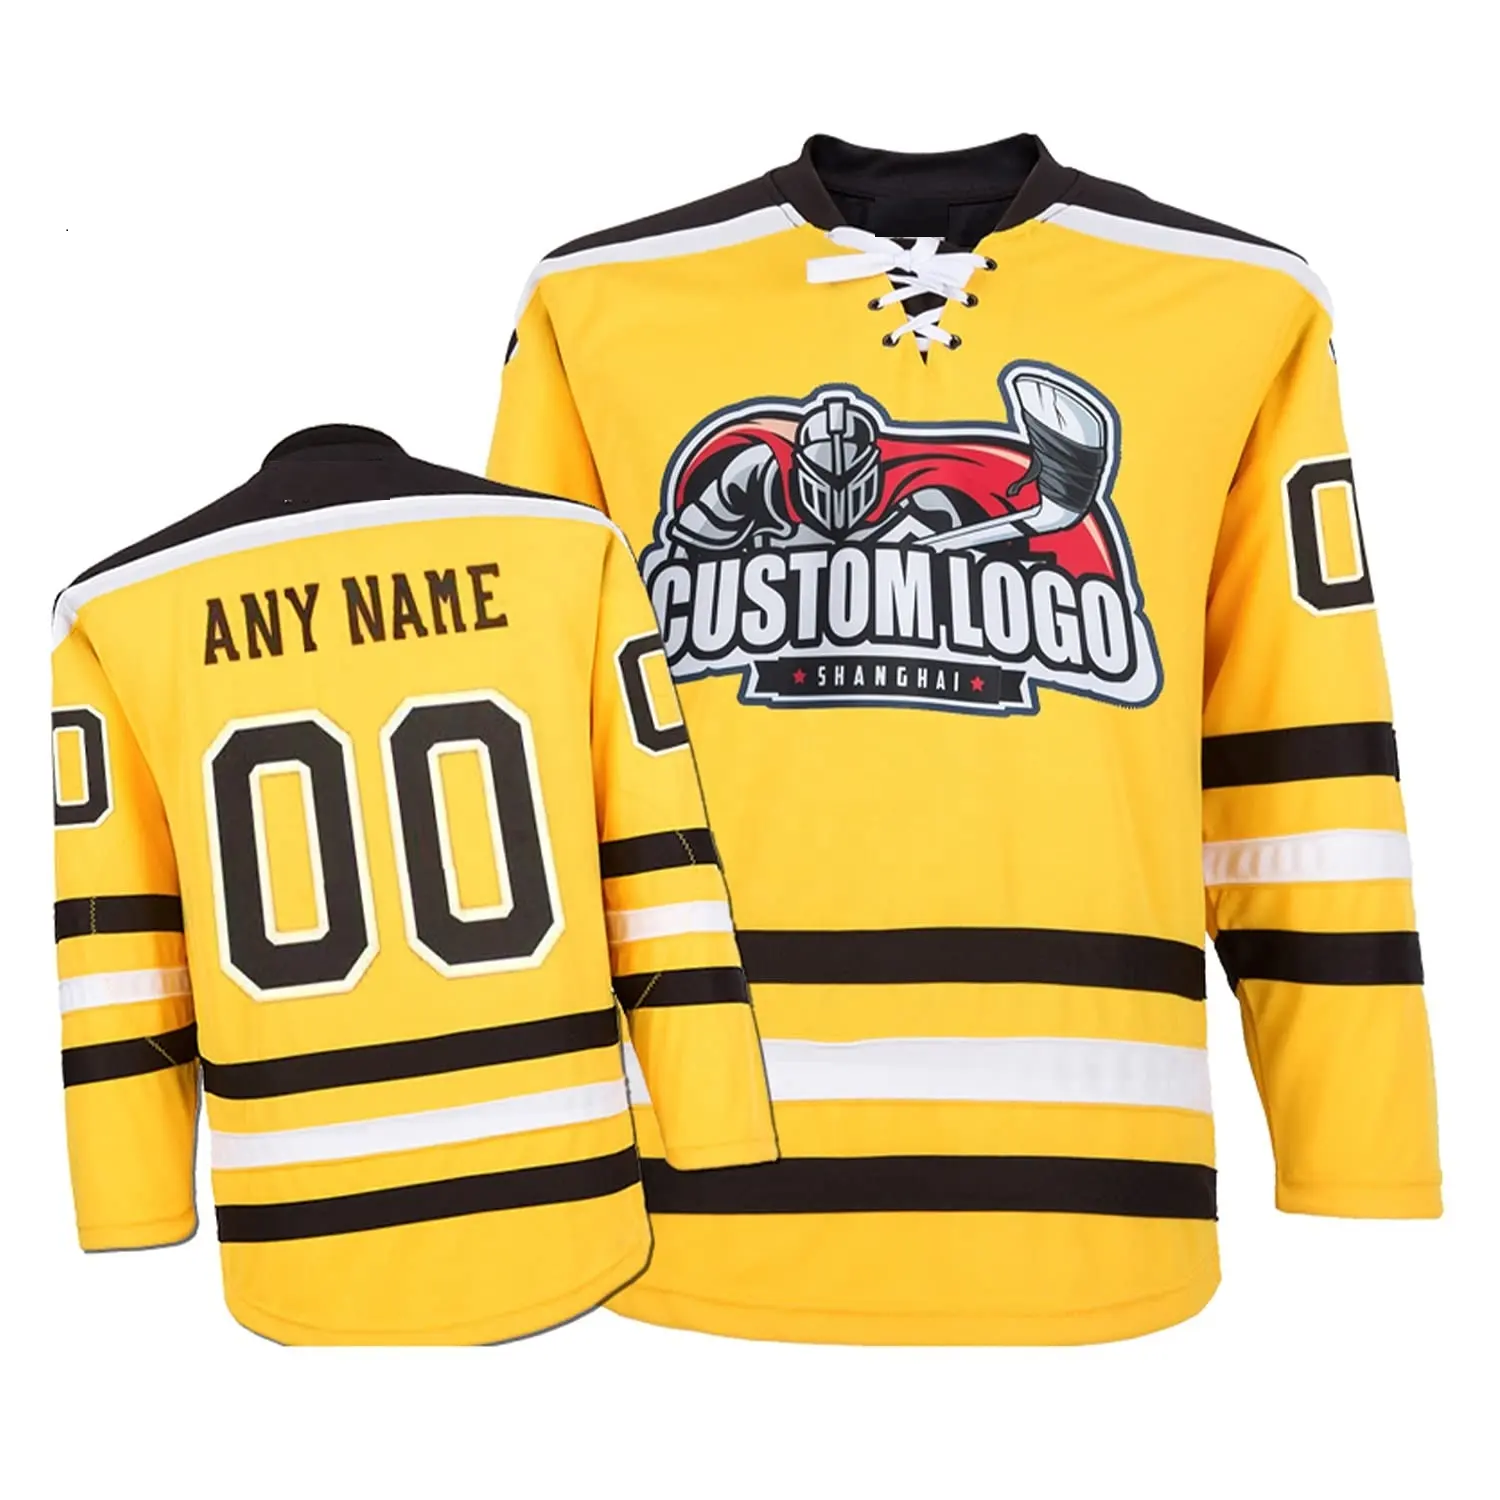 Black Men Women Youth S-8XL Authentic Stitched Name Numbers Make Your Own Custom Ice Hockey Jersey